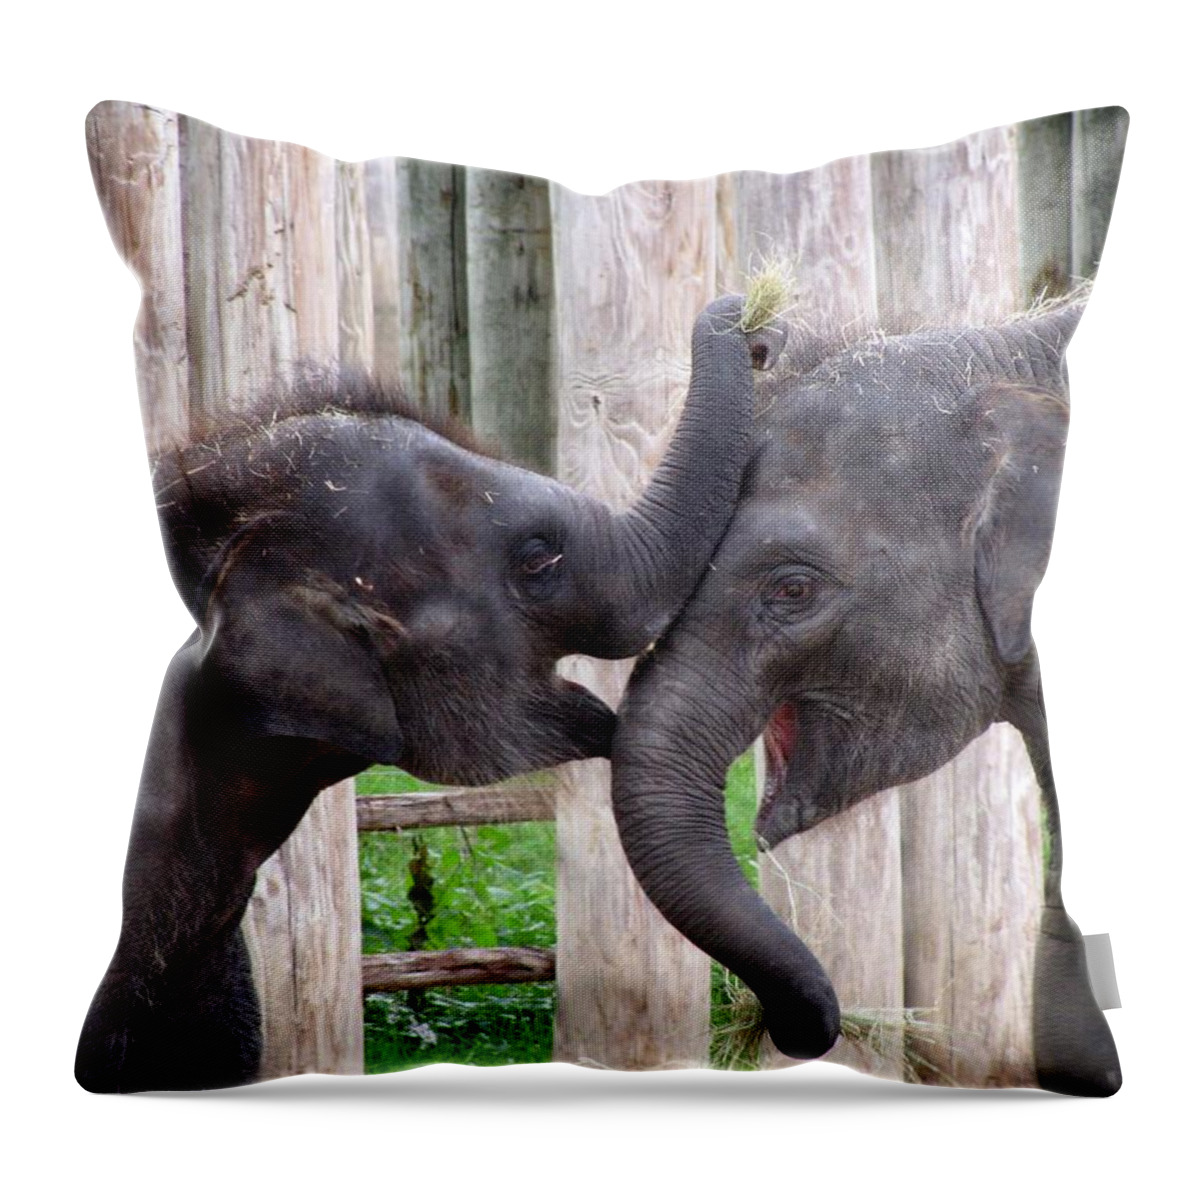 Elephant Throw Pillow featuring the photograph Baby Elephants - Bowie and Belle by Pamela Critchlow